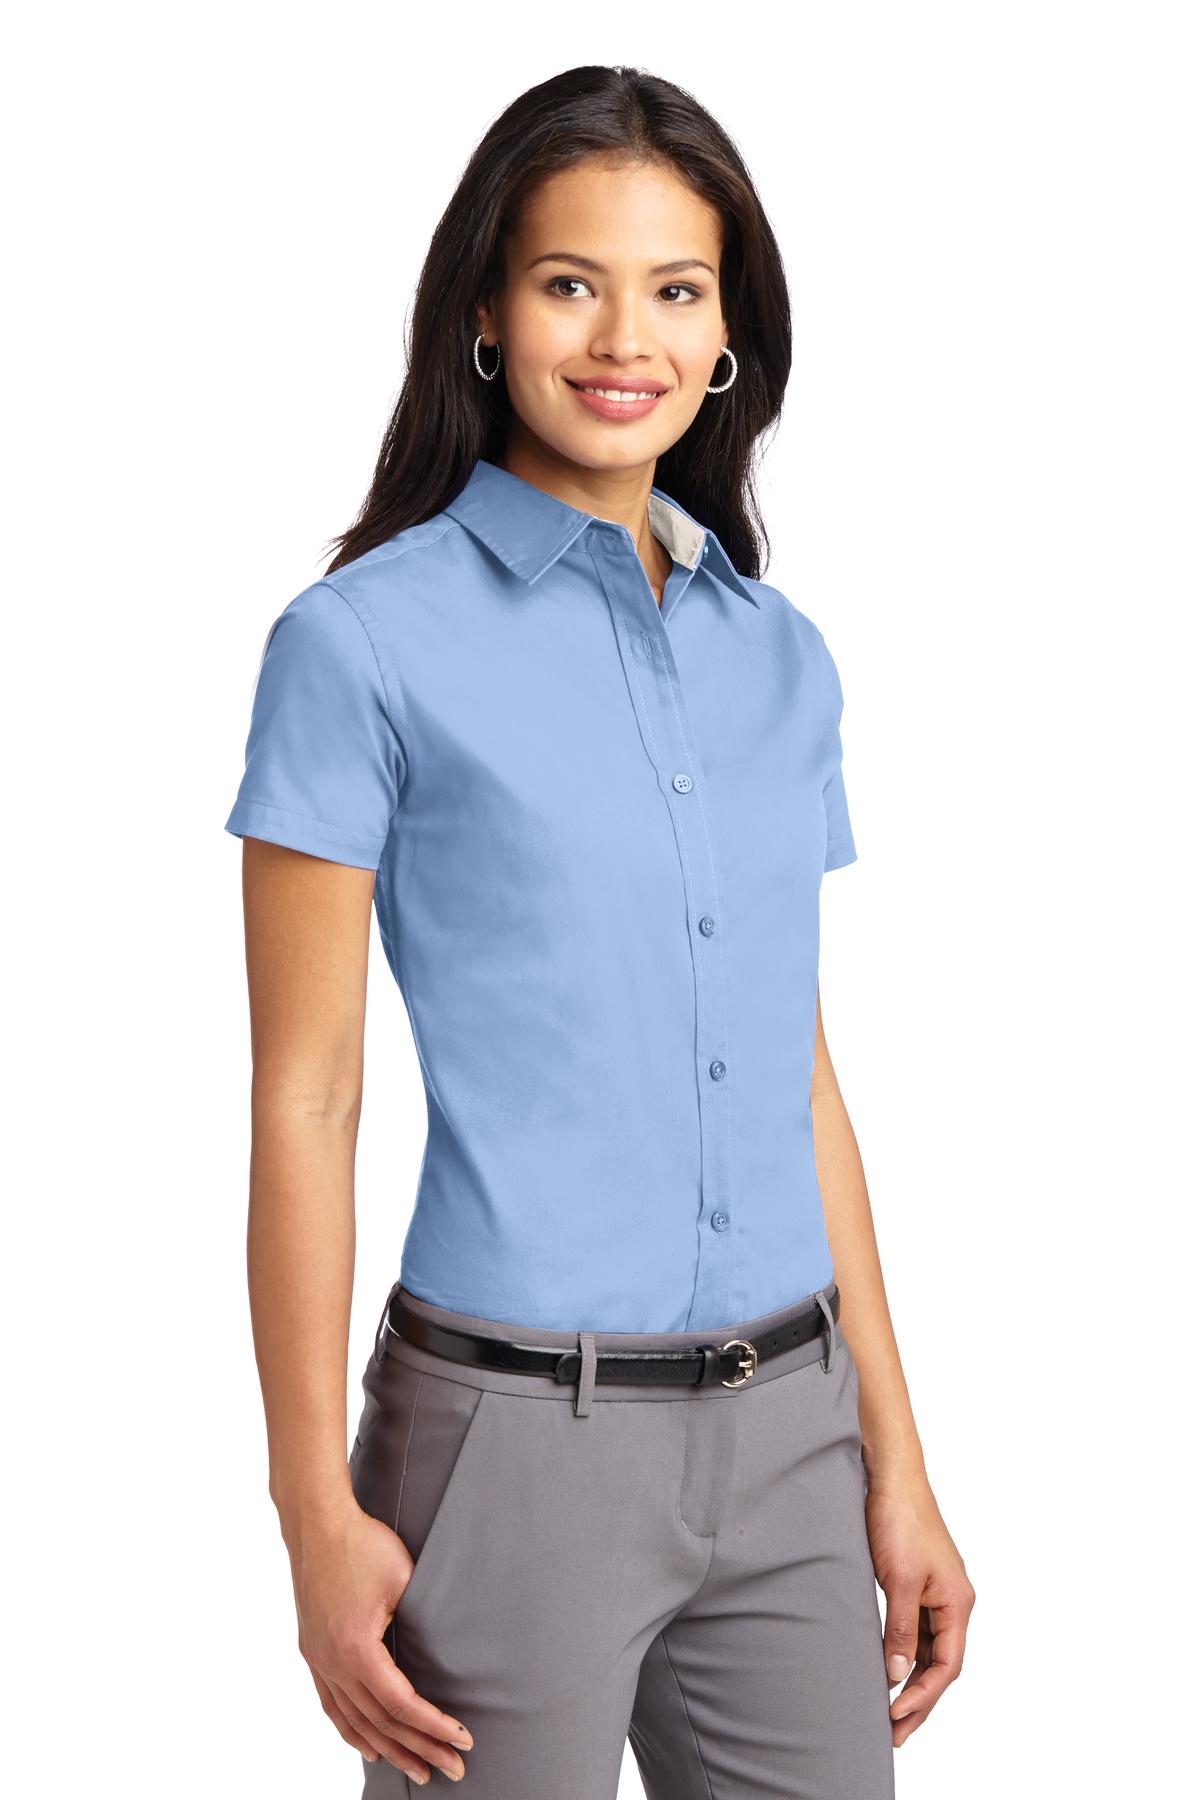 Port Authority WomenS Short Sleeve Easy Care Shirt. L508. - image 4 of 6